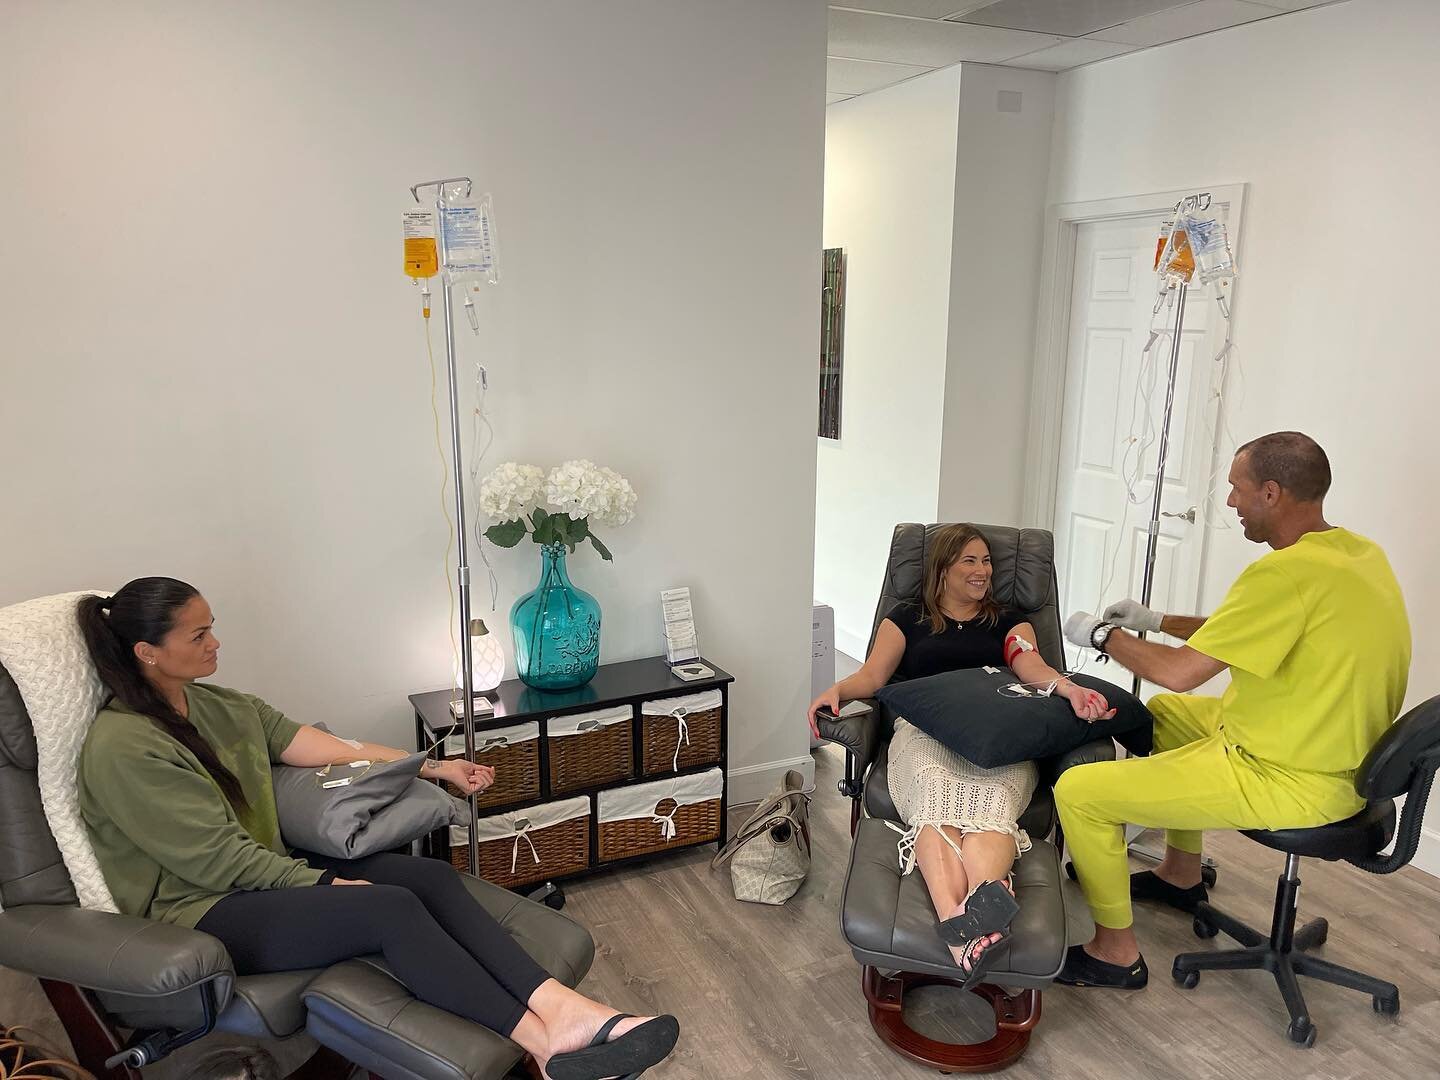 Attention, Hawaii! Experience the rejuvenating power of IV therapy at Kona Integrative Health, your trusted source for IVs! ✨💧

Ready to revitalize your body? Schedule your IV appointment today! Our team of experienced professionals is here to help 